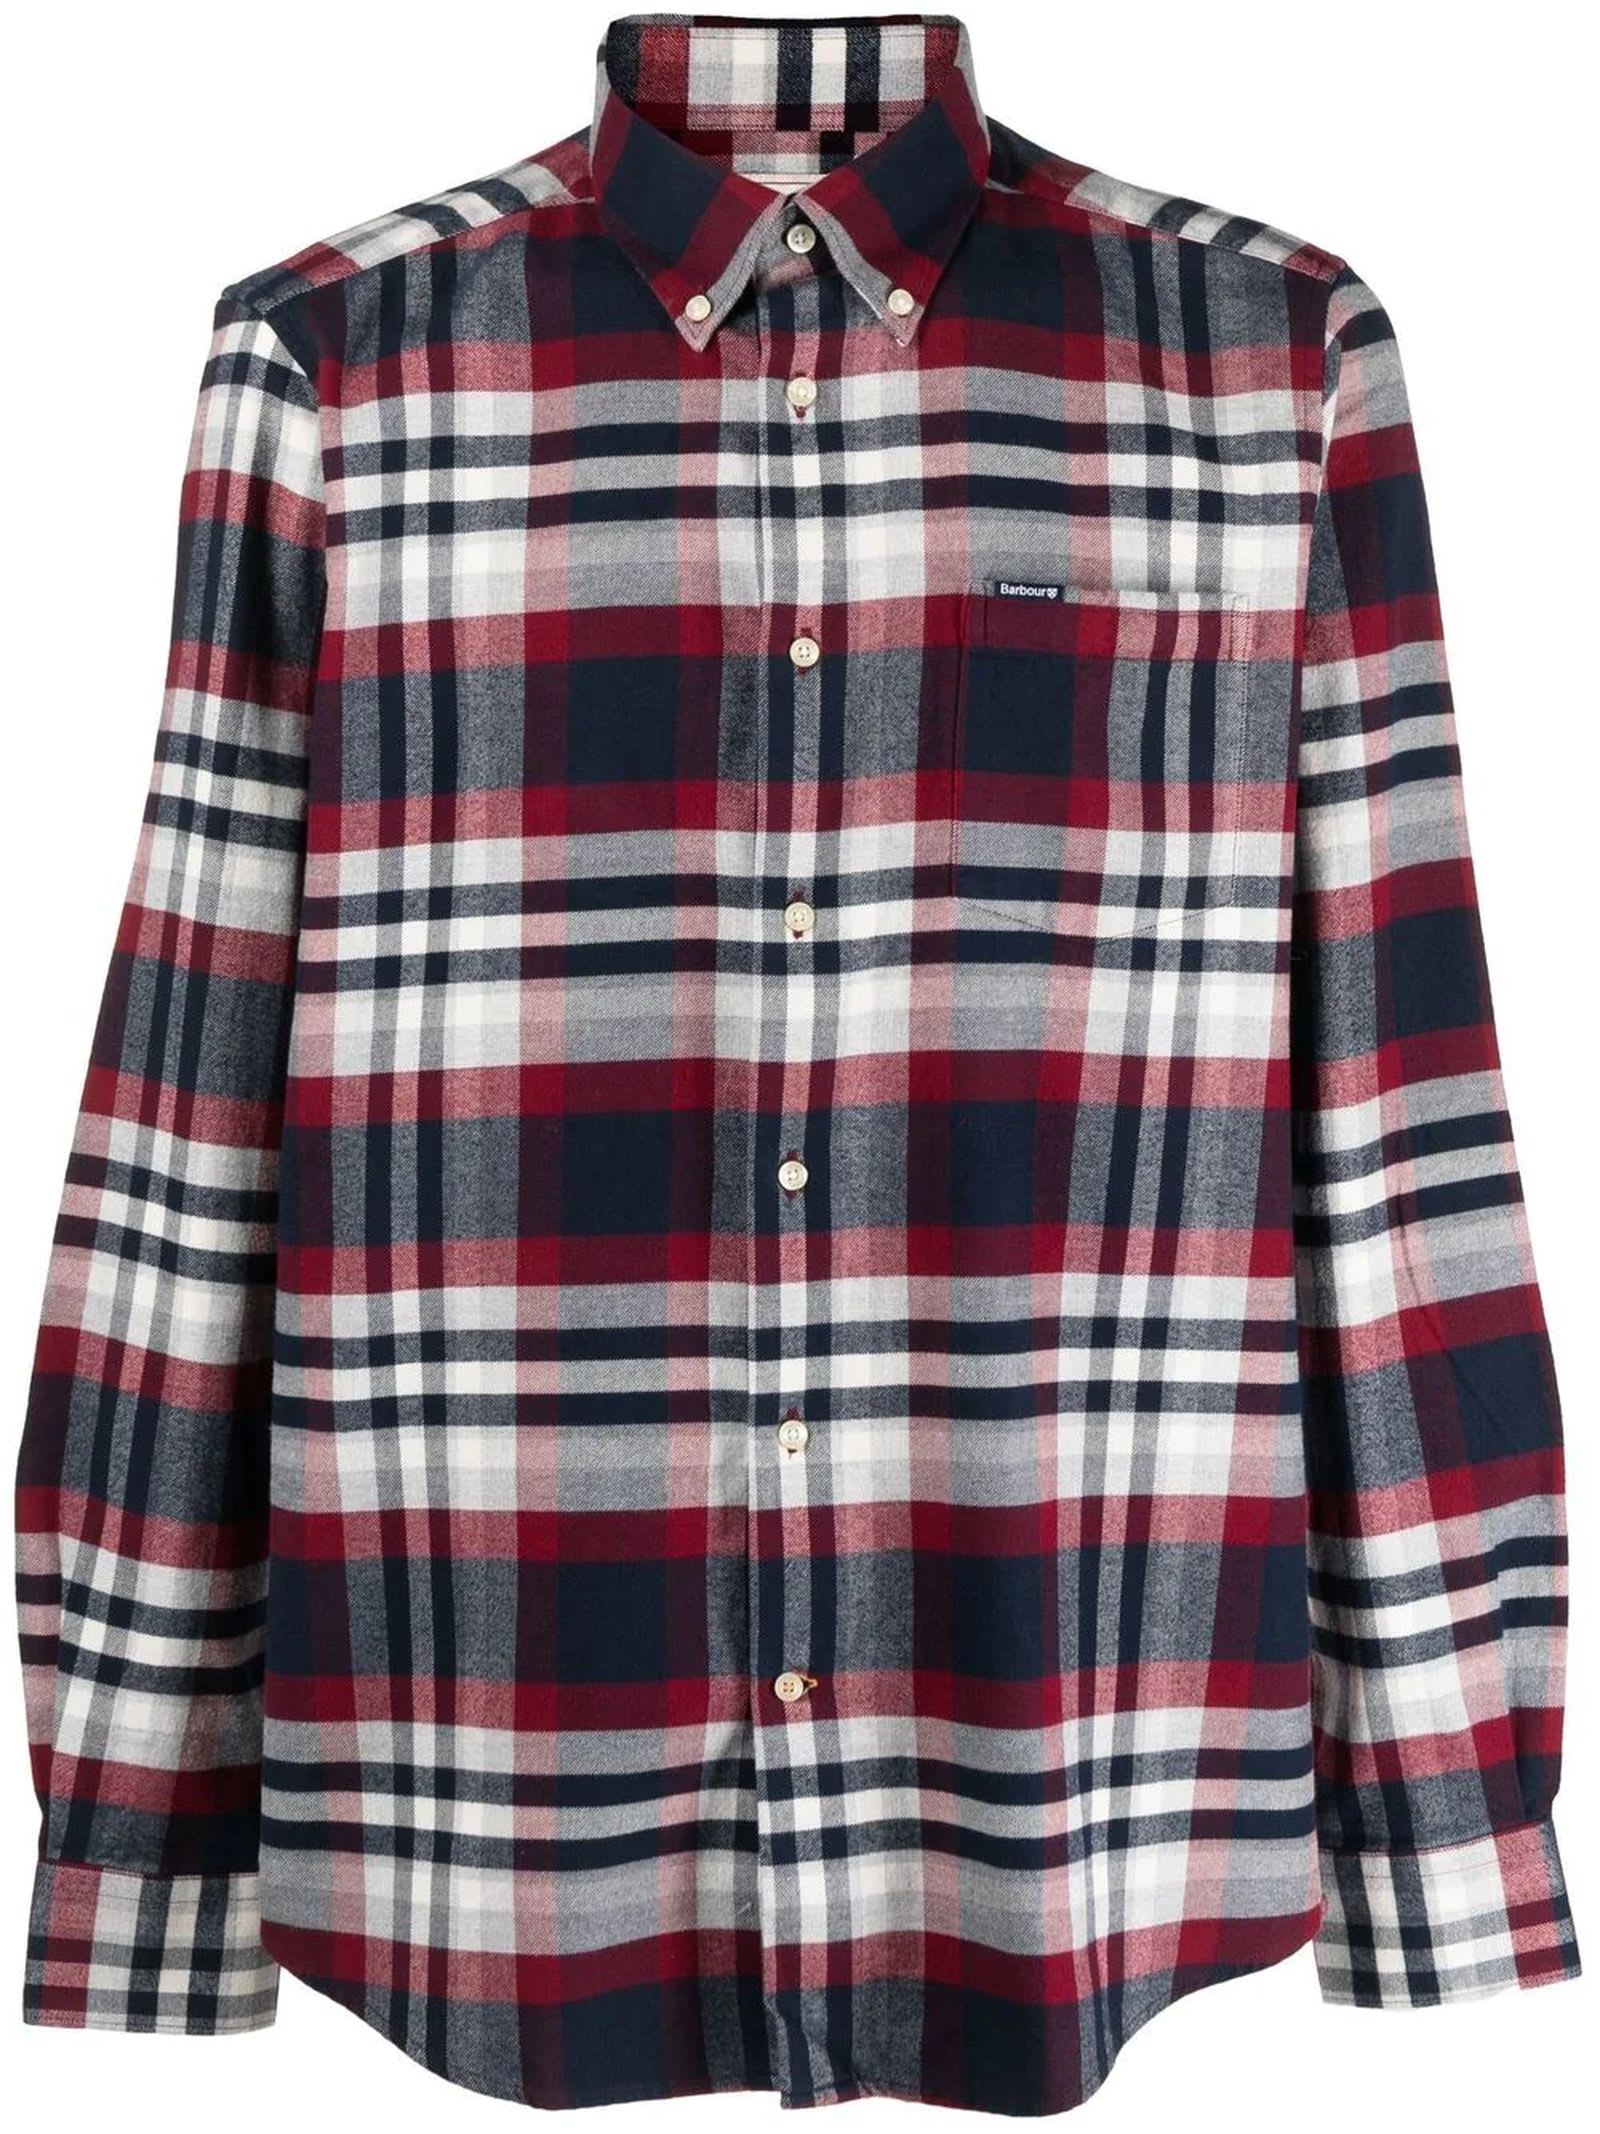 Barbour Red And Navy Blue Cotton Shirt